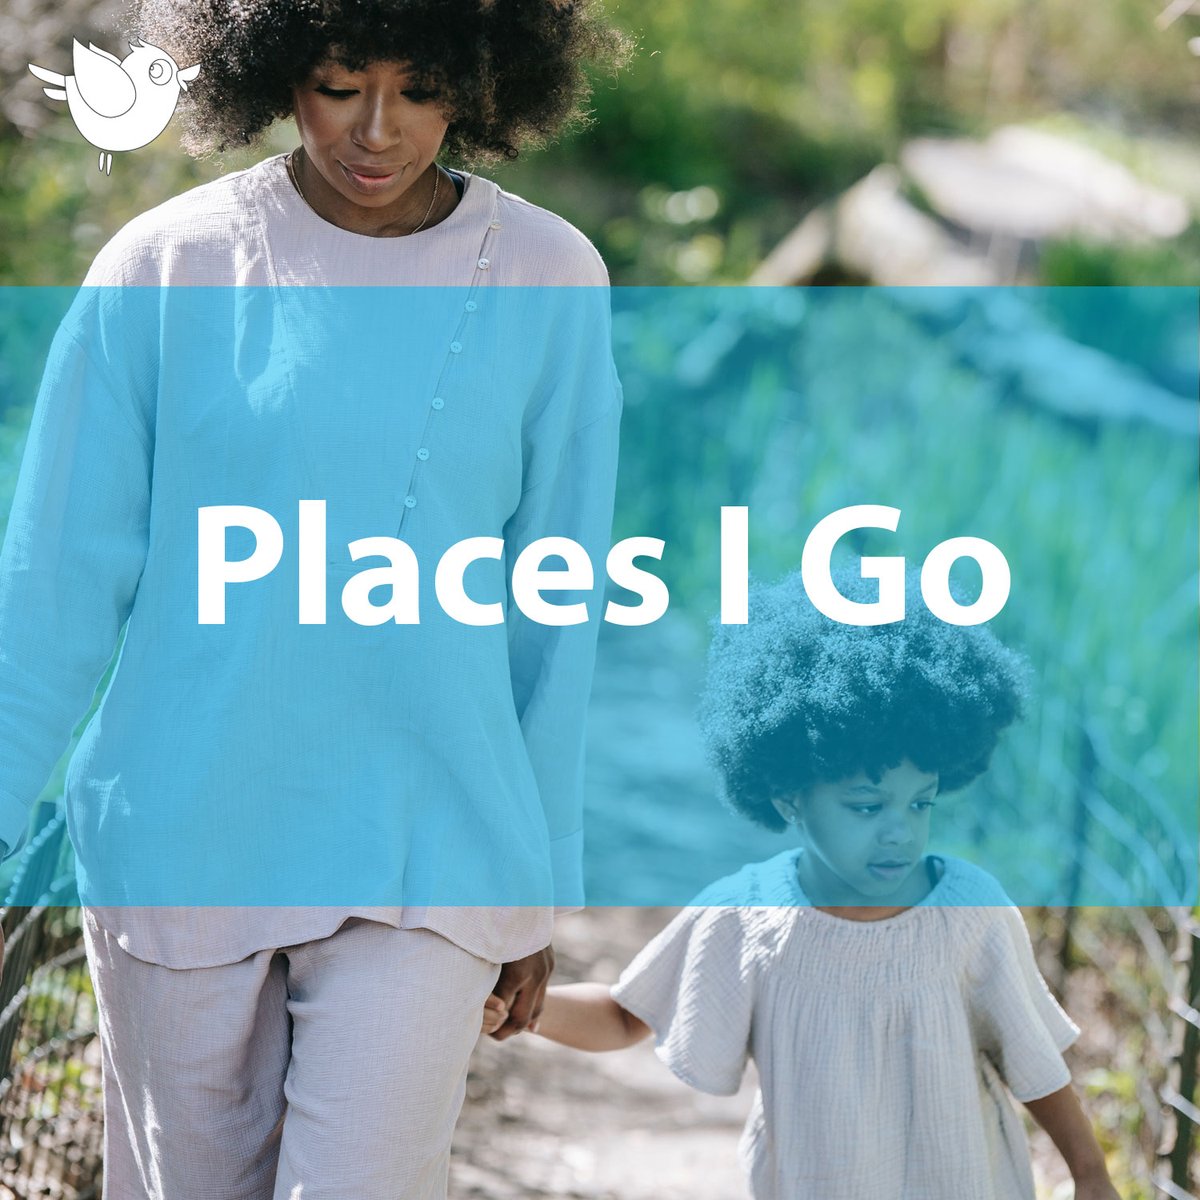 Our theme this week is Places I Go! Visit our At Home page for more themed activities: bluebirddayprogram.com/places-i-go/
#pediatrictherapy #homeactivities #learning #homeschoolresources #teachingathome #parenthood #momlife #dadlife #parentinglife #kidsactivityathome #activitiesforkids